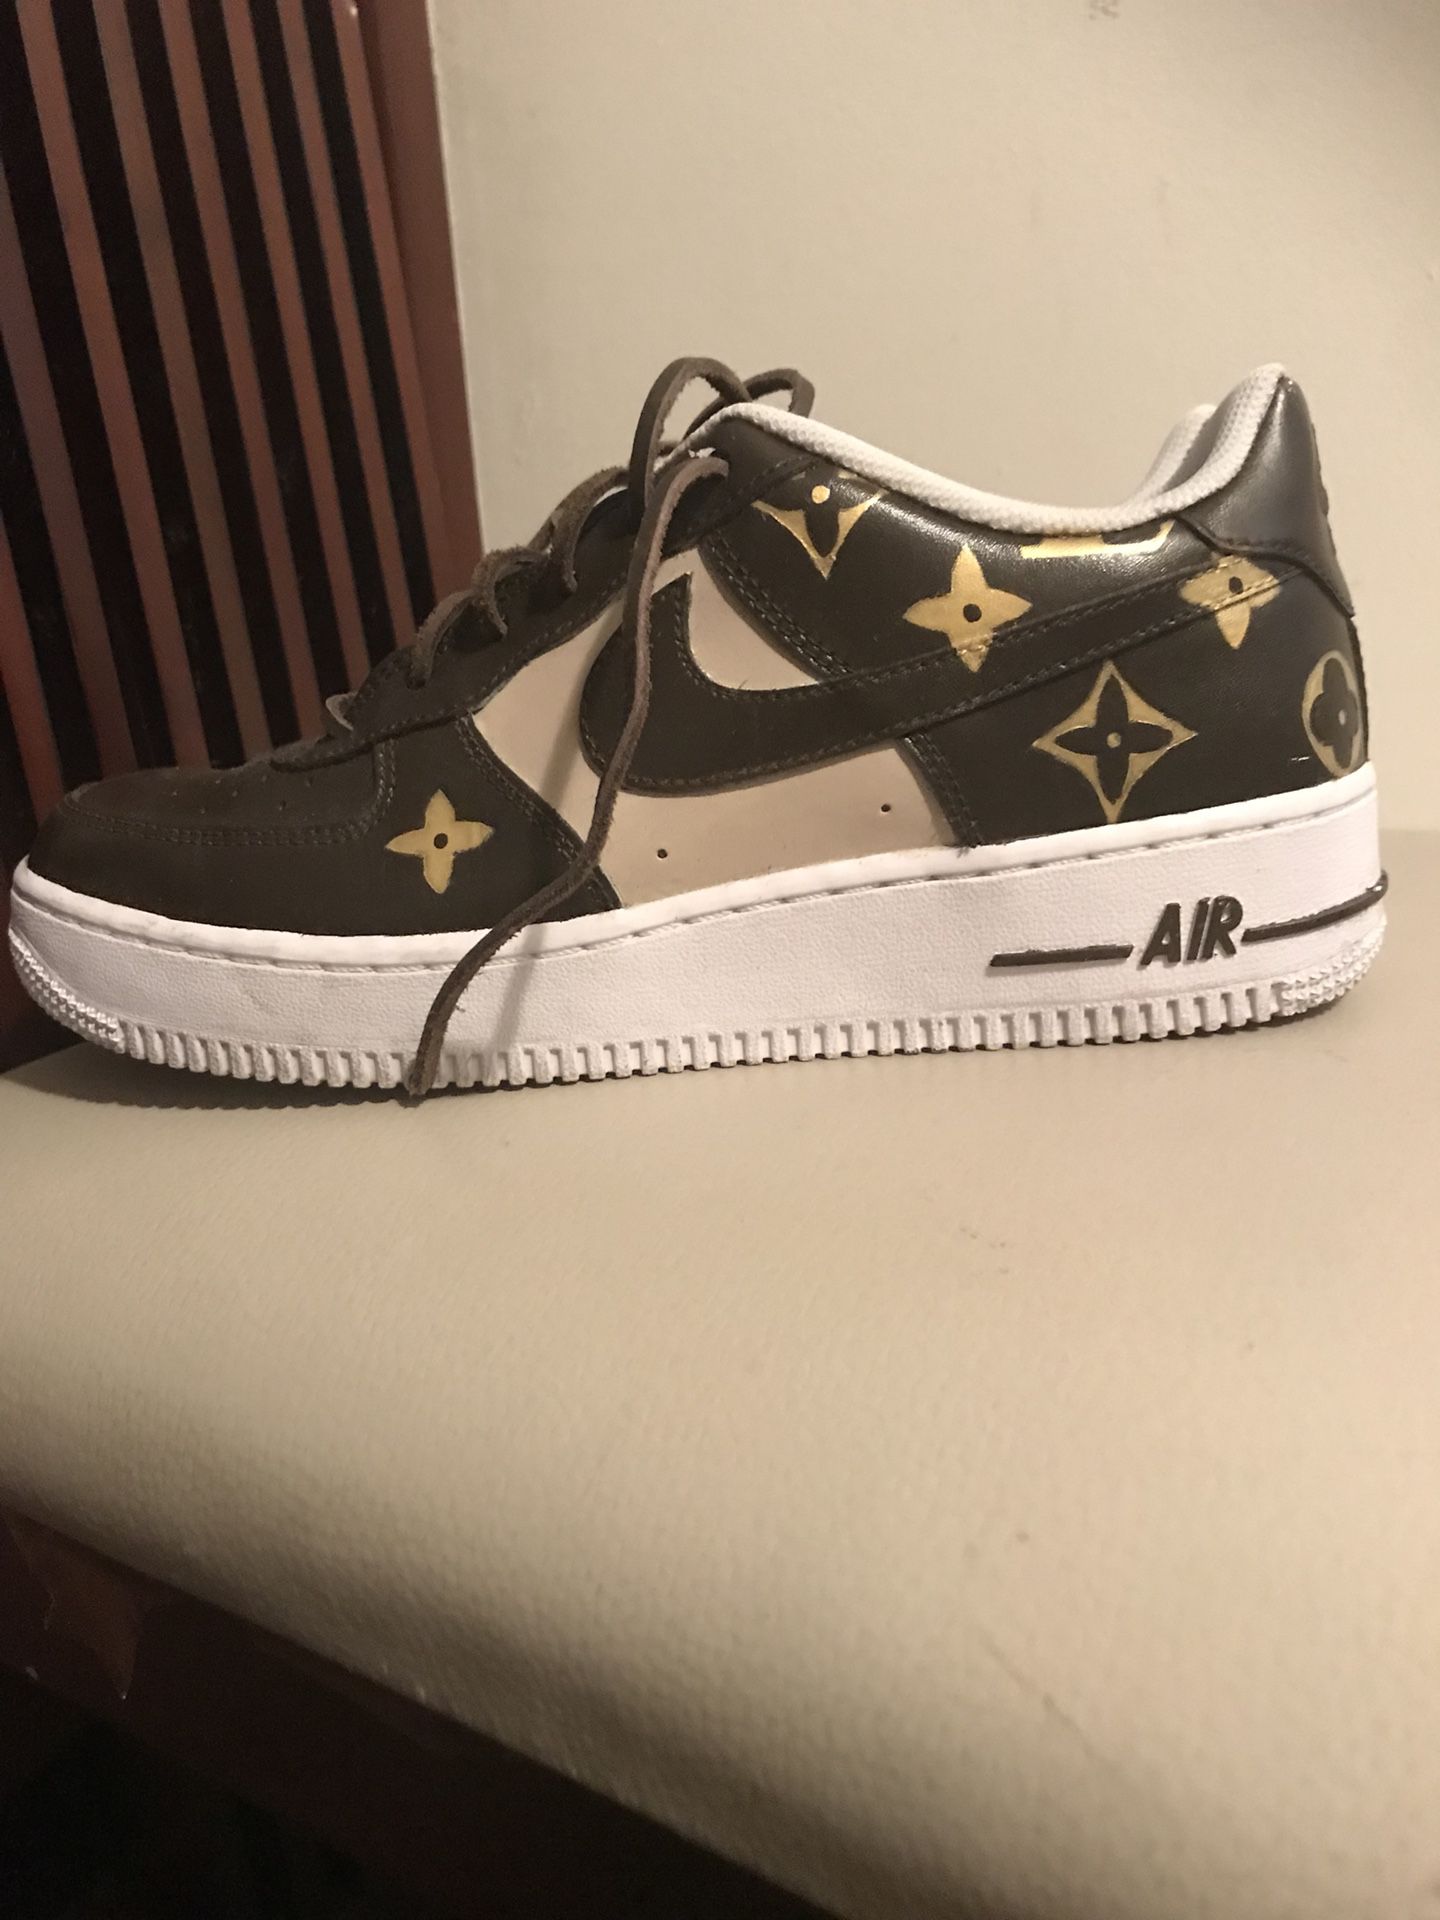 Louis Vuitton Sweatsuit With Custom Air Force Ones for Sale in Hialeah, FL  - OfferUp